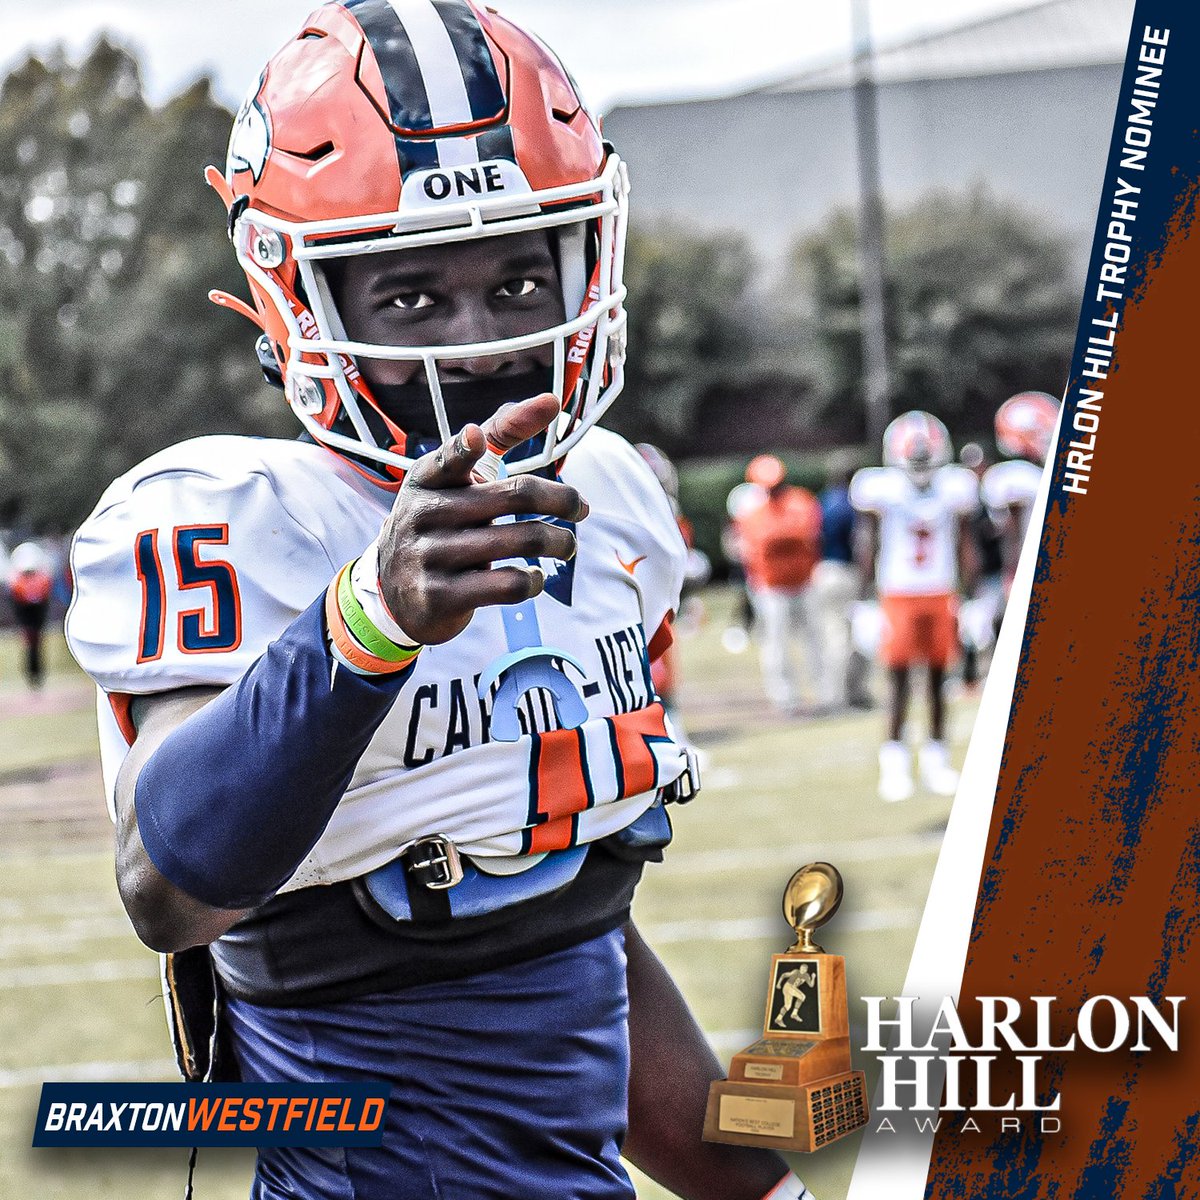 After a record-setting season catching the ball for @cnfootball, @westfieldb15 looks to become the sixth Eagle to be named a finalist for the @HarlonHillAward 📋 bit.ly/3U0ZpNF